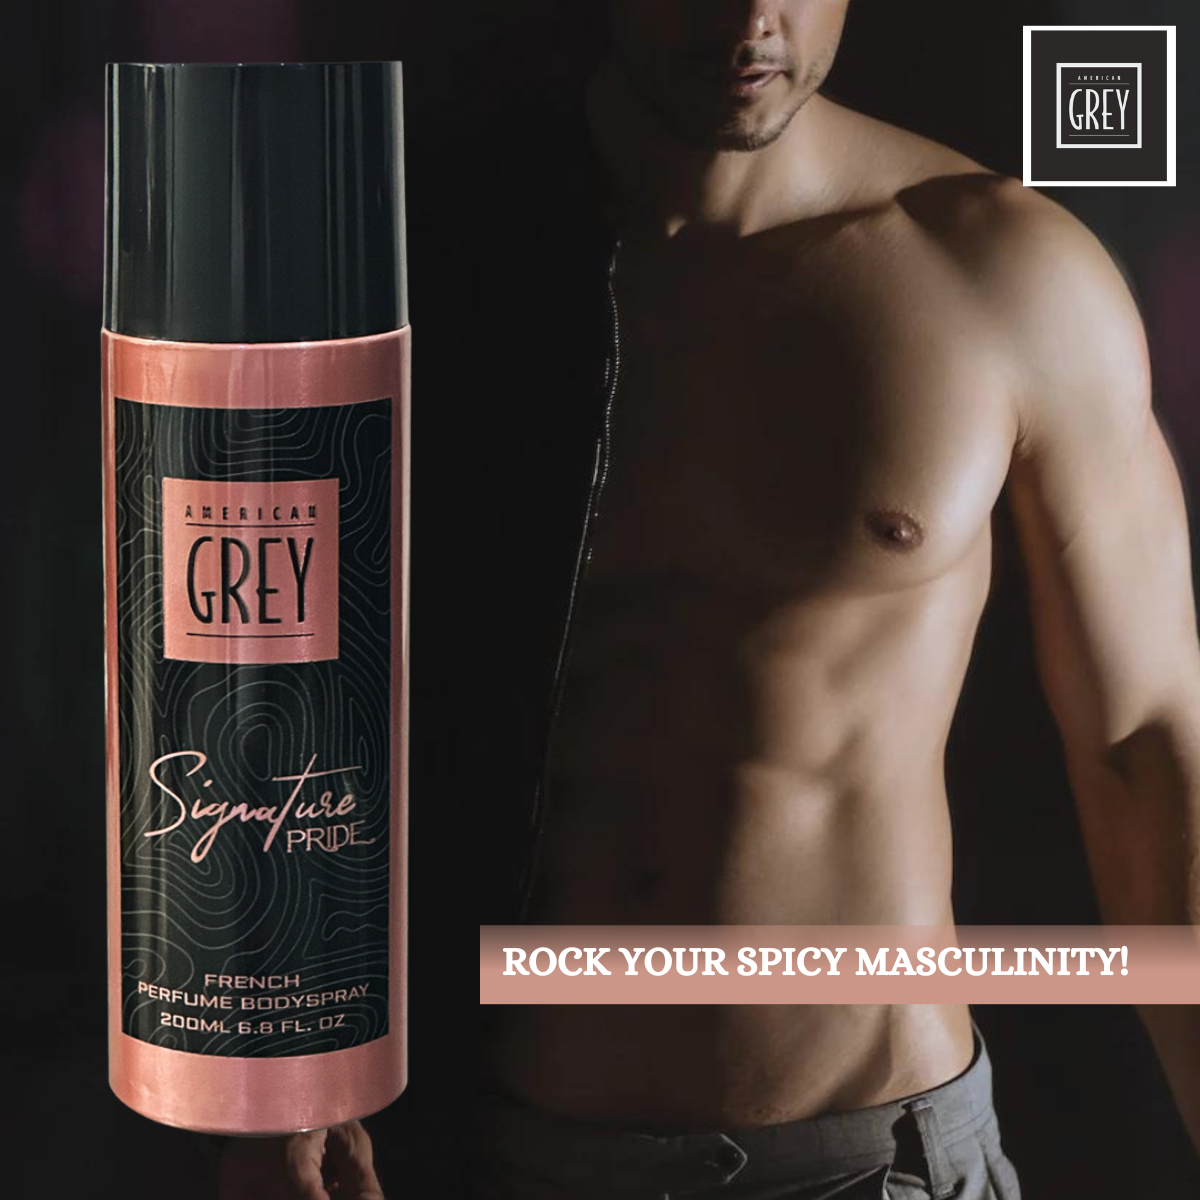 spicy fragrance for men, floral and fruity fragrance for men, signature pride, men deodorant, deodorant for men at best price in india, sweet fragrance for men, signature pride deo for men, signature pride men deodorant, buy men deodorant online, best long lasting deo for men in india, deo for women, best long lasting deo for men, best long lasting deodorant in india for male 2023, best deo spray in India, best deo for men, best men deo brand in India, best floral smelling deo for men,  top rated mens deo, men grooming essential, men fragrance for summer season, best deo for hot weather, popular summer deodorant for men, best smelling deo for evening wear